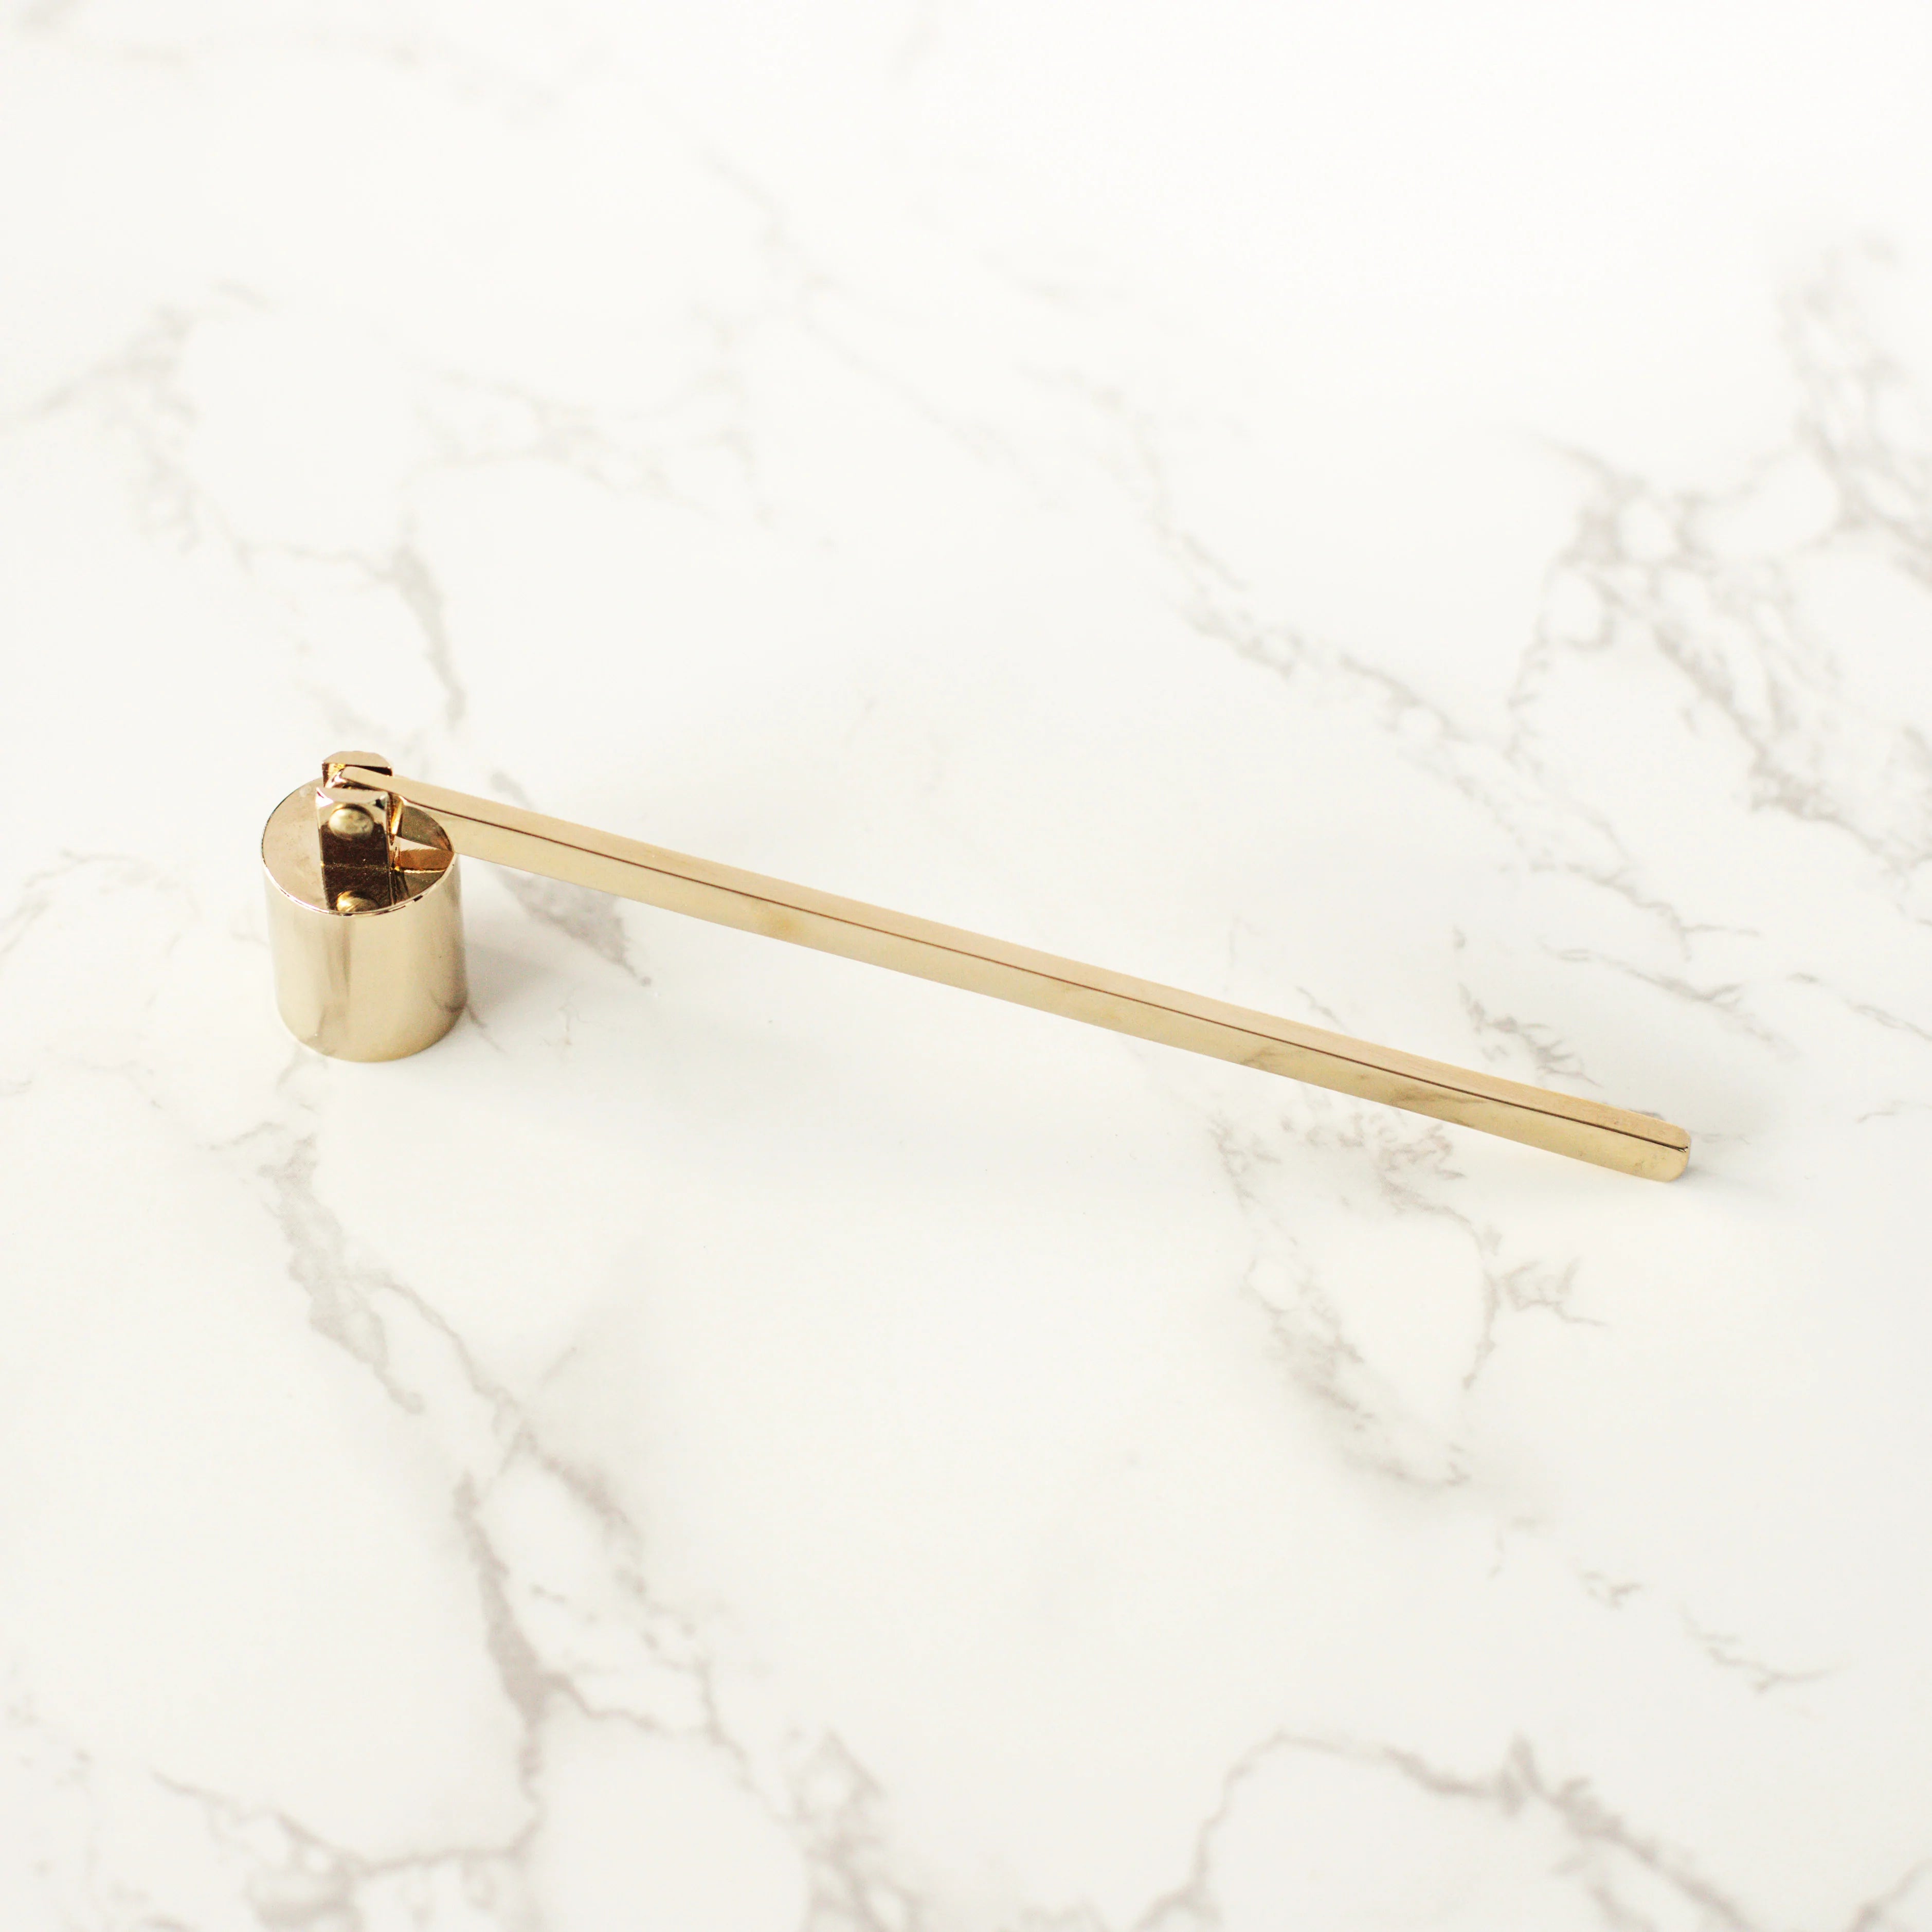 Soy Delicious - Wick Trimmer & Candle Snuffer